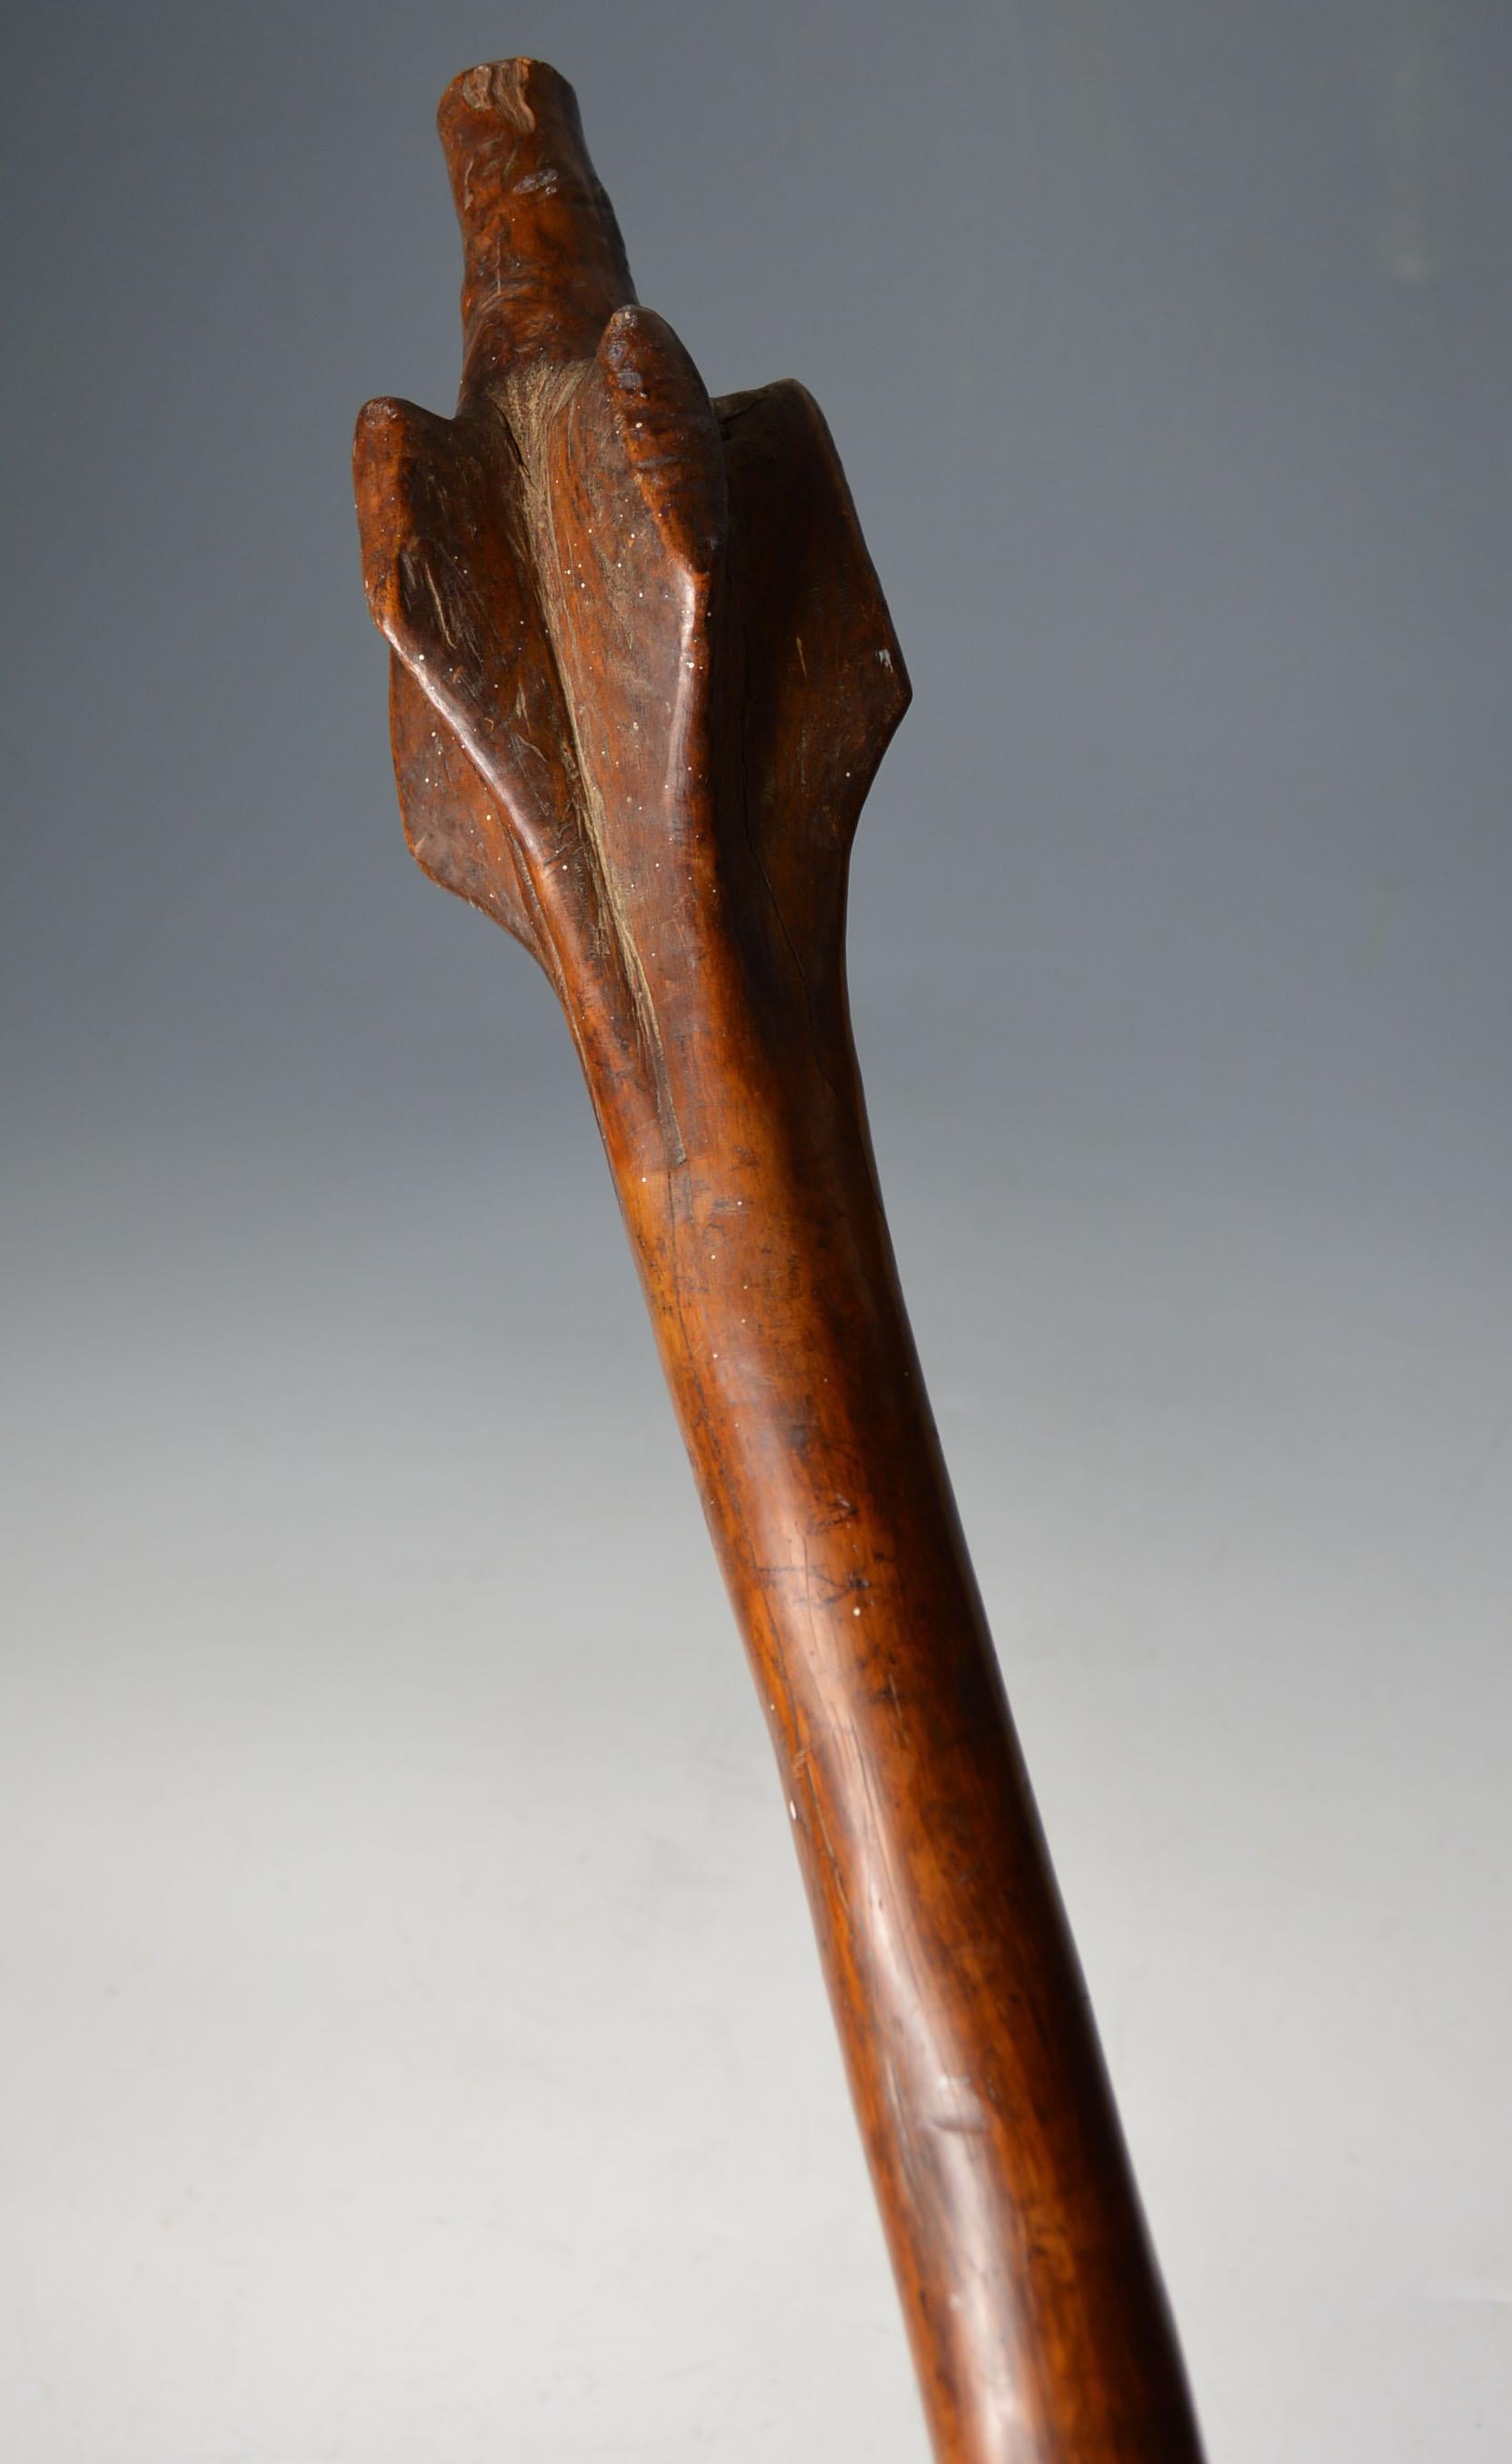 Good Fiji root stock war club Polynesian oceanic Australian pacific
Fine example with carved handle and excellent walnut type patina
Period 19th century
Hard wood
Condition: minor age cracking overall fine
Measure: Length 94 cm.